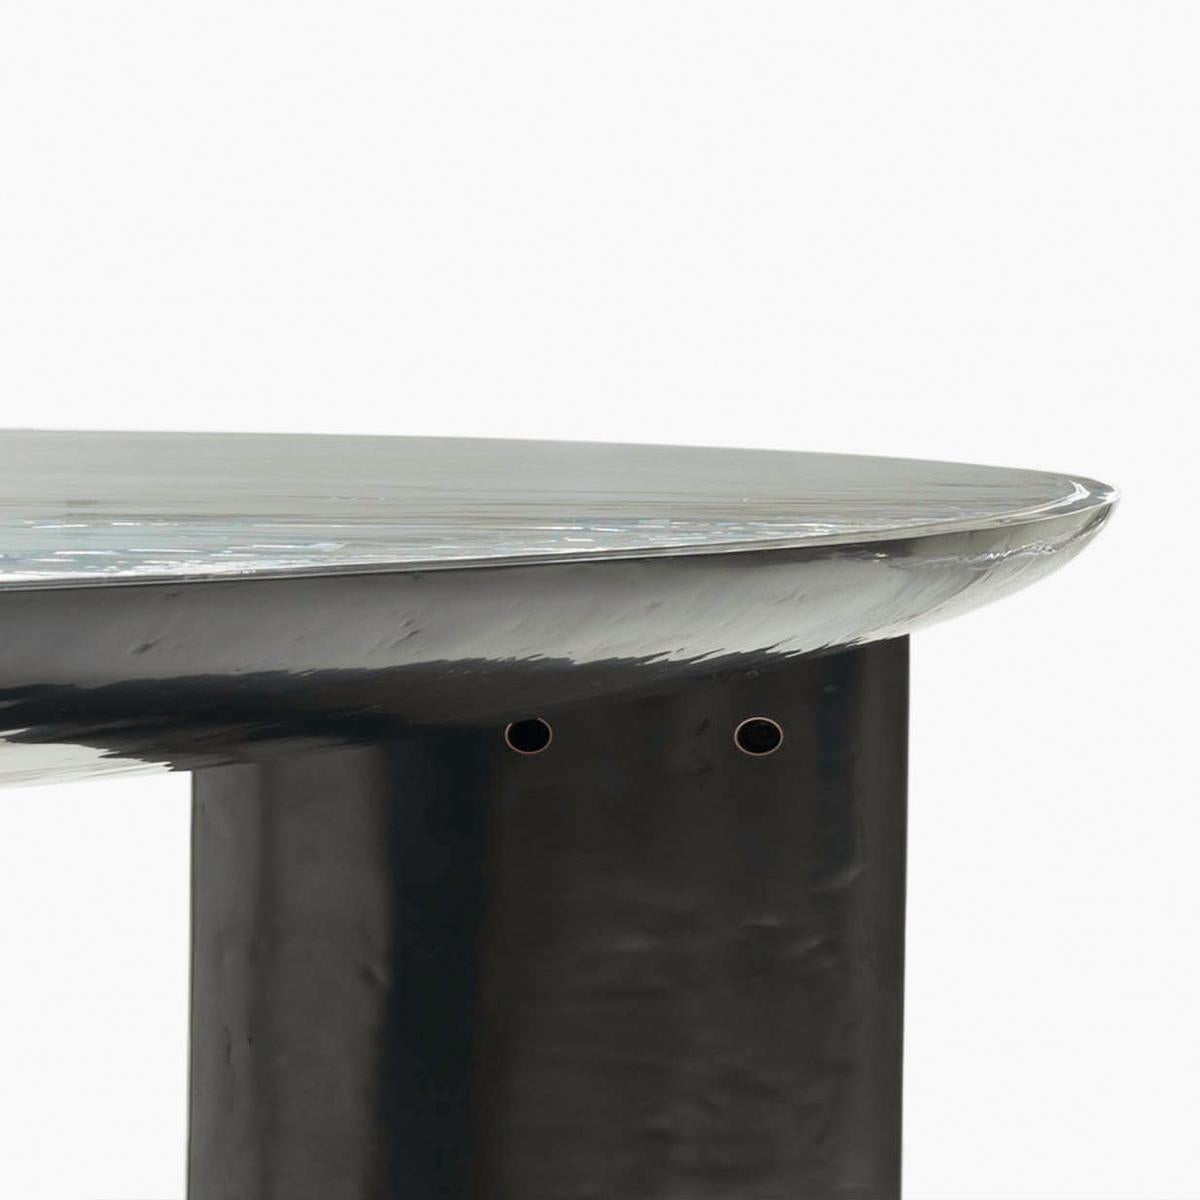 Molded The Foch Liquid Aluminium, Silver and Gun Metal Dining Table, Moon Collection